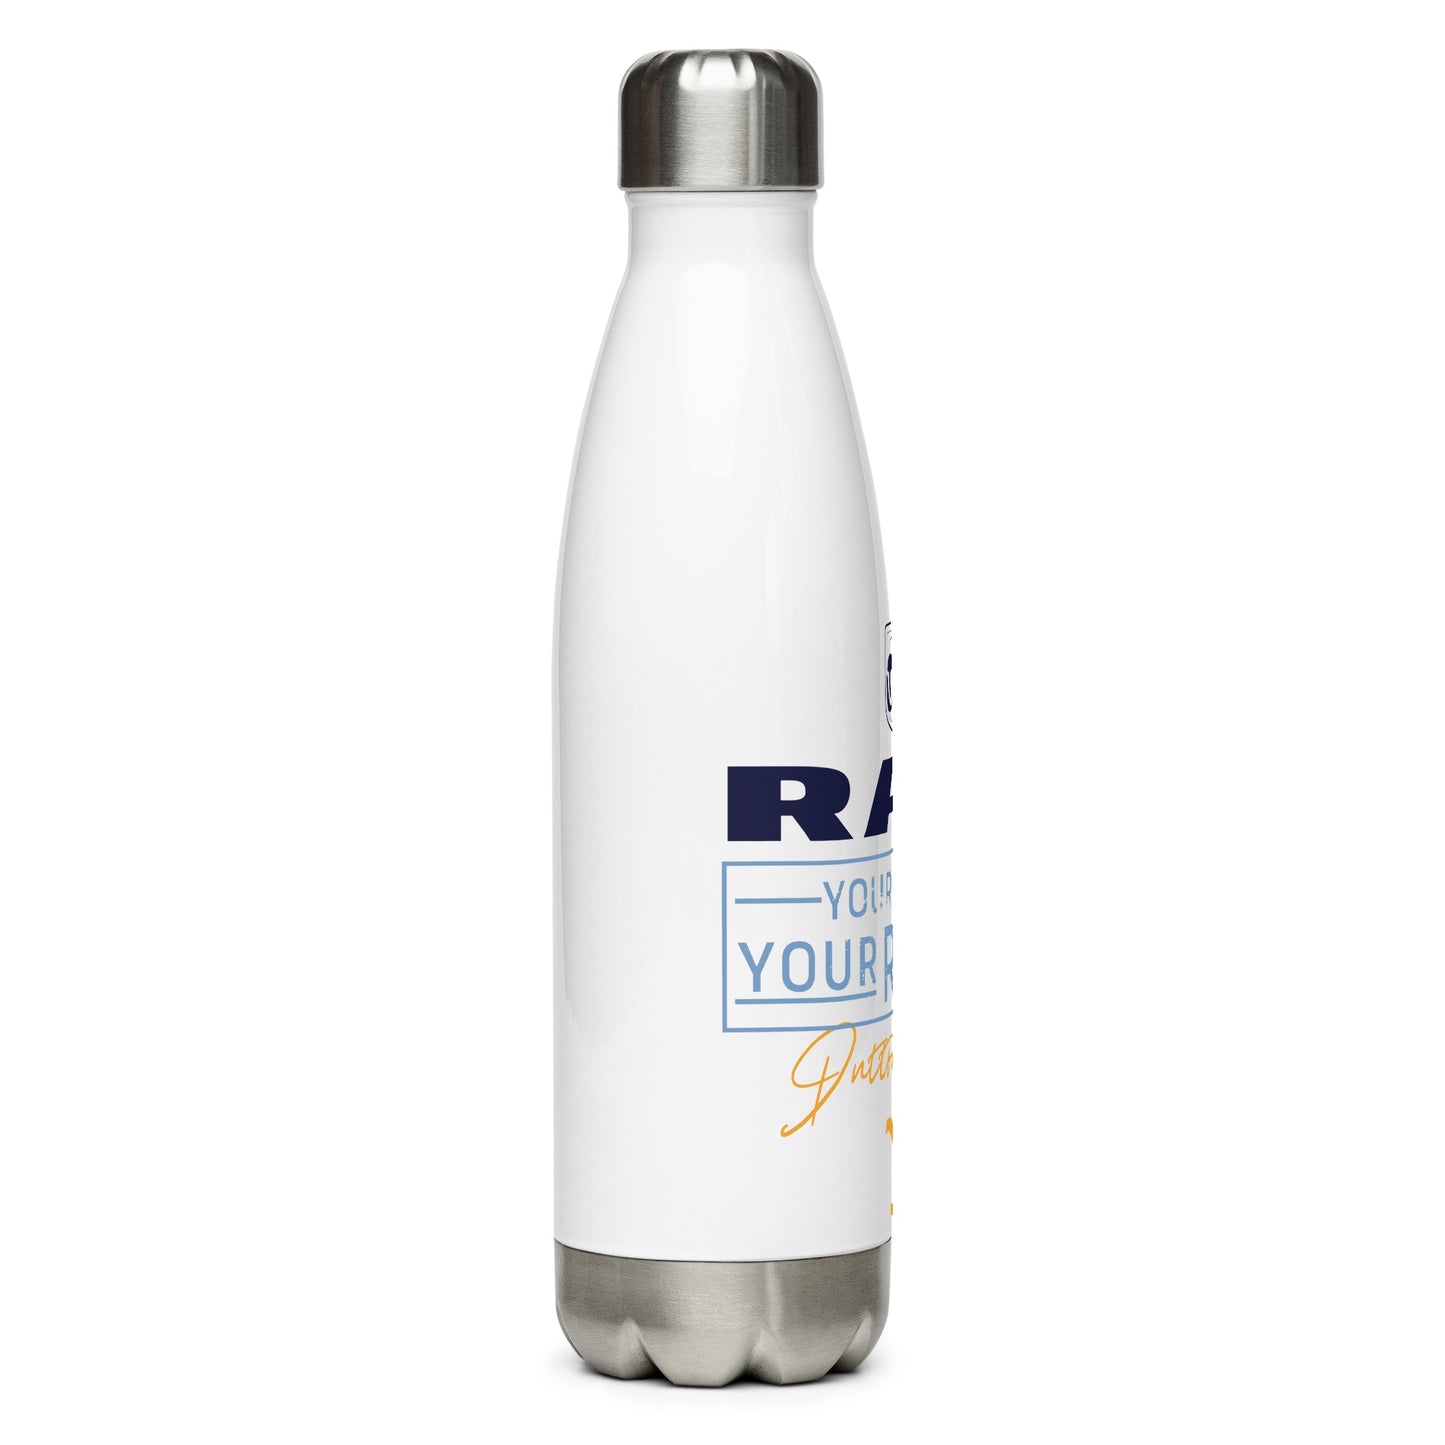 Yellowstone x Ram Your Ranch Your Rules Water Bottle